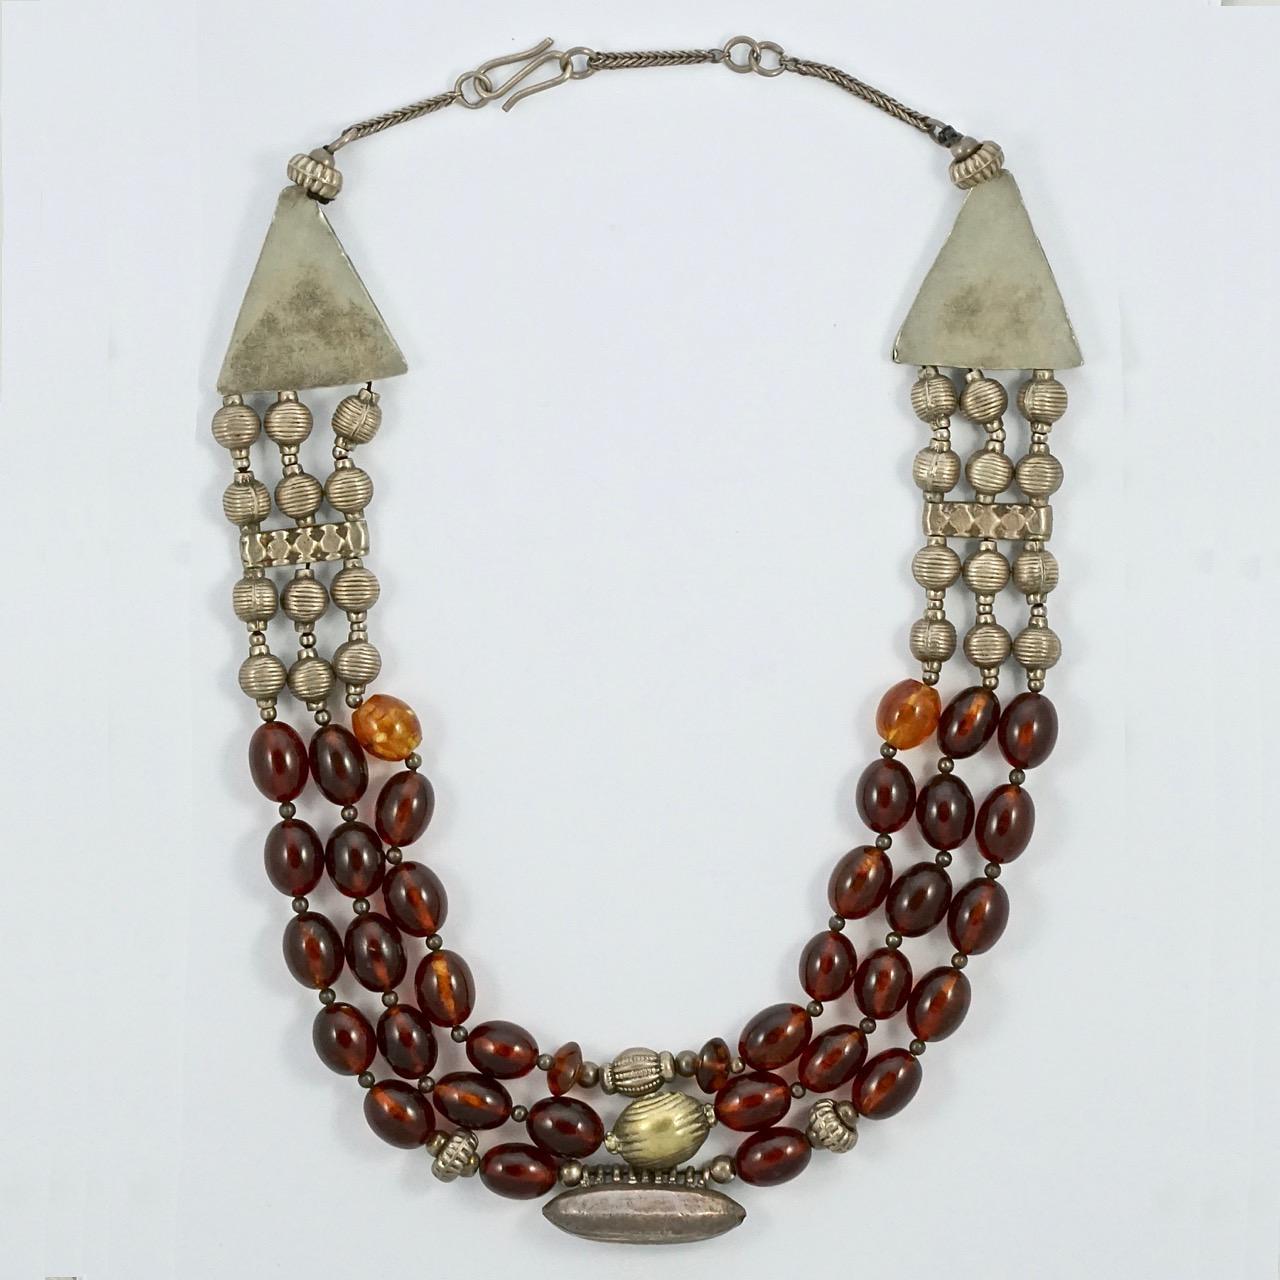 Hand Made Silver Tone and Triple Strand Polished Cognac Amber Bead Necklace In Good Condition For Sale In London, GB